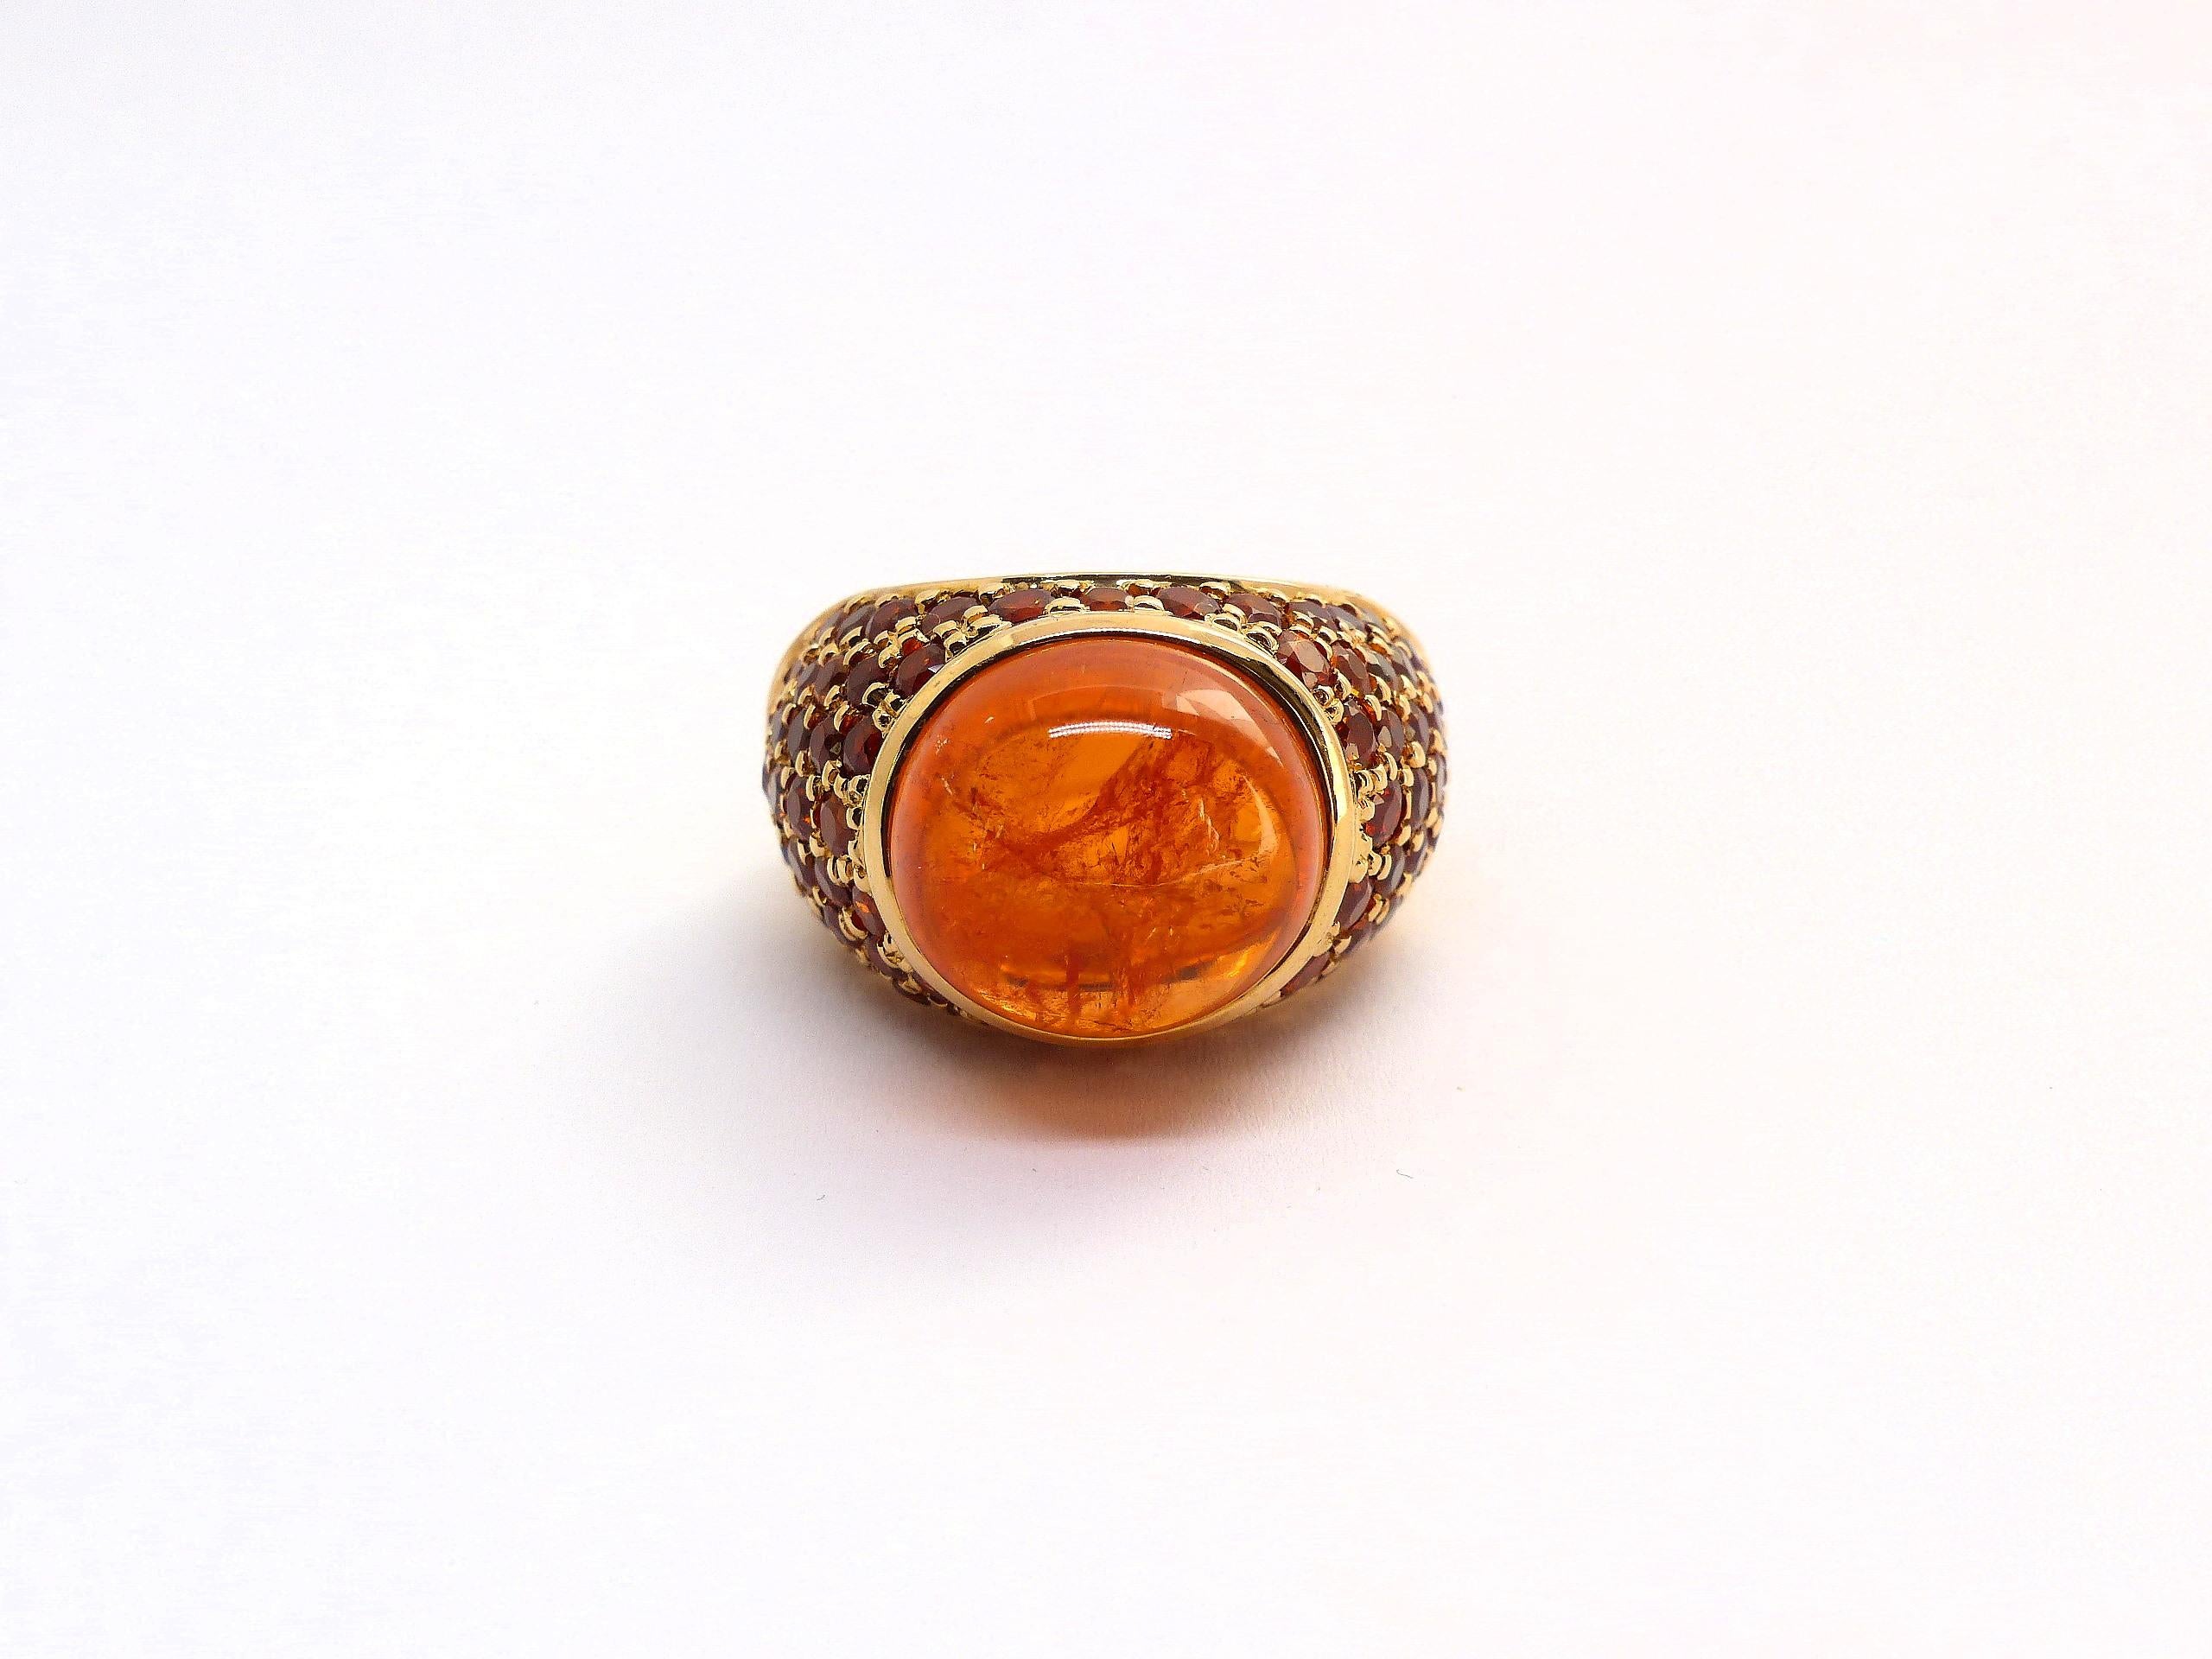 This 18k rose gold (23.20g) ring is set with 1x fine Mandarin Garnet Cabouchon (oval, 14.5x13.5mm, 18.47cts). + 72x Mandarin Garnets (facetted, round, 2-3mm, 5.97cts). 

Ringsize: 6 3/4 (53.5)